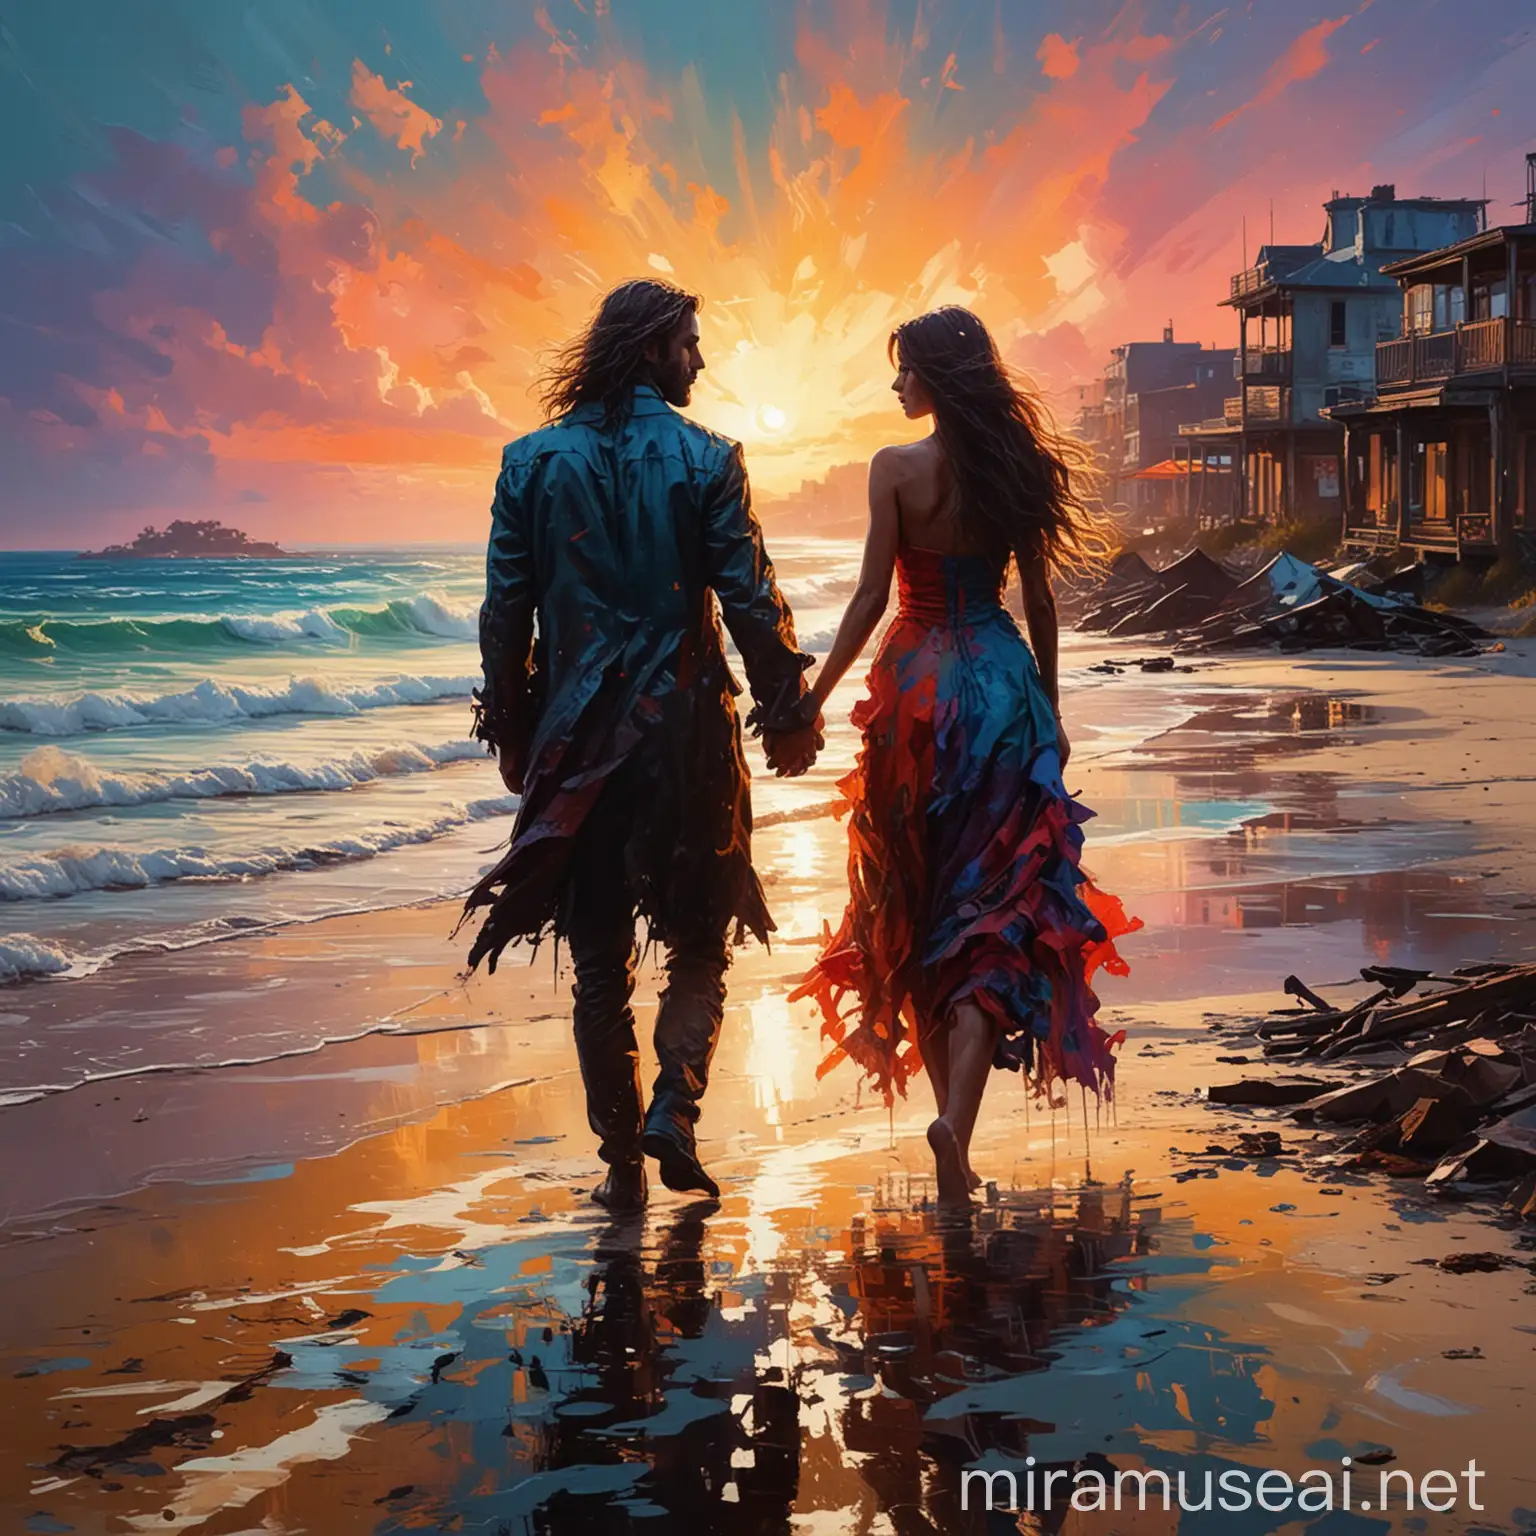 impressionist interpretation of a post apocalyptic like hotel beach town dazzeling landscape with bold colors and distinct brushstrokes, vibrant, textured, atmospheric, the silhouette of sea man with his love beautiful woman she's wearing stunning dress with long hair